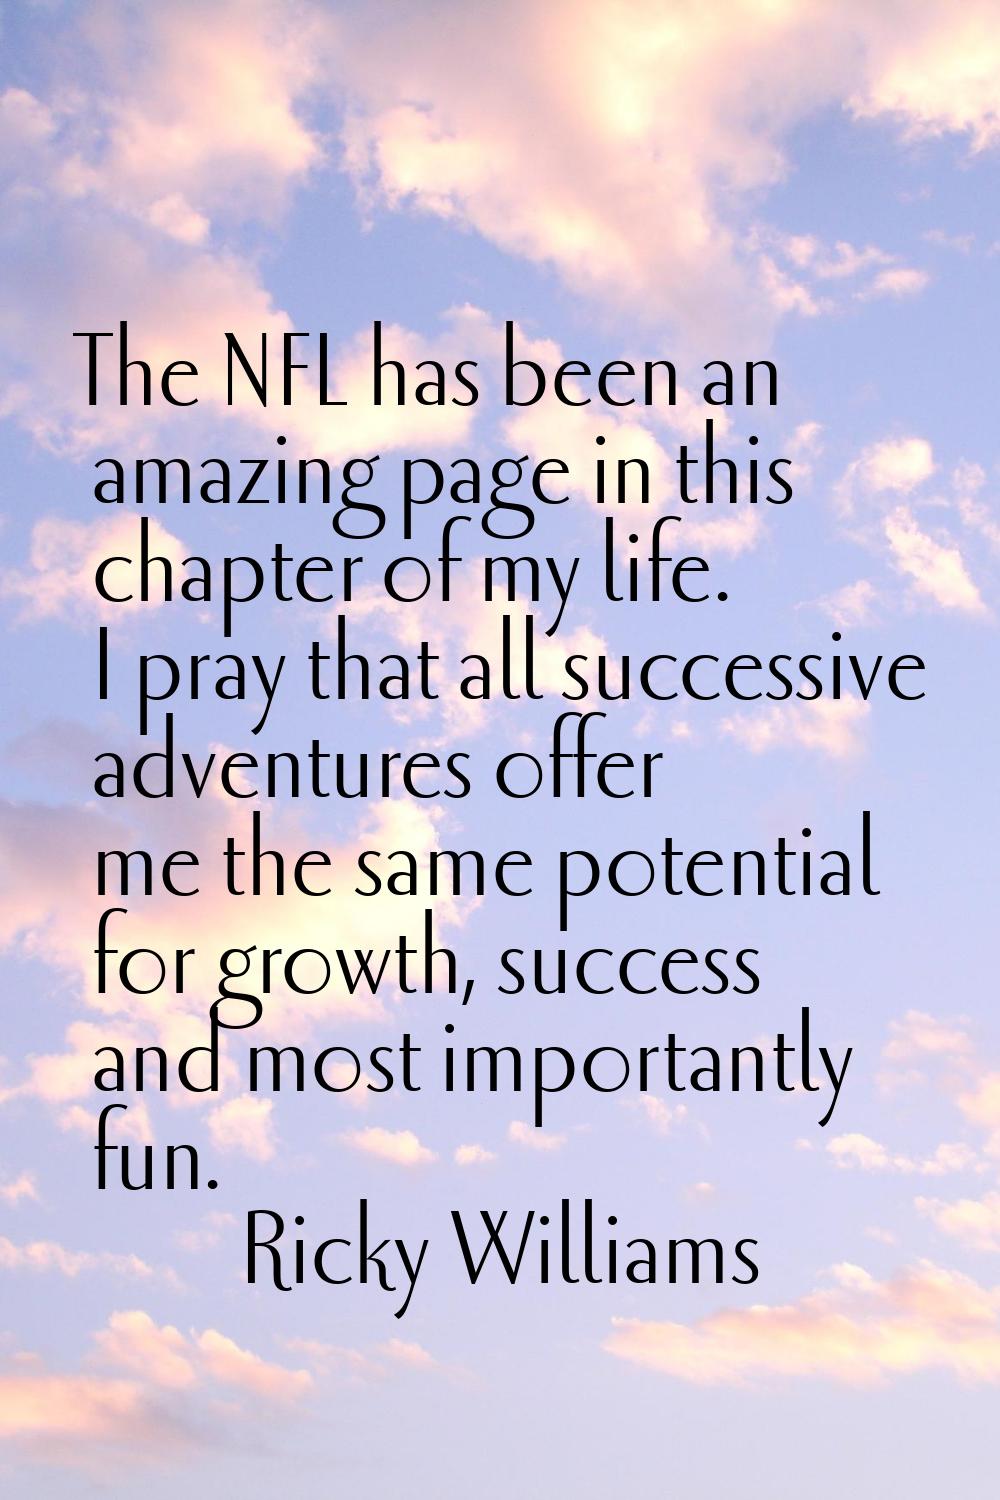 The NFL has been an amazing page in this chapter of my life. I pray that all successive adventures 